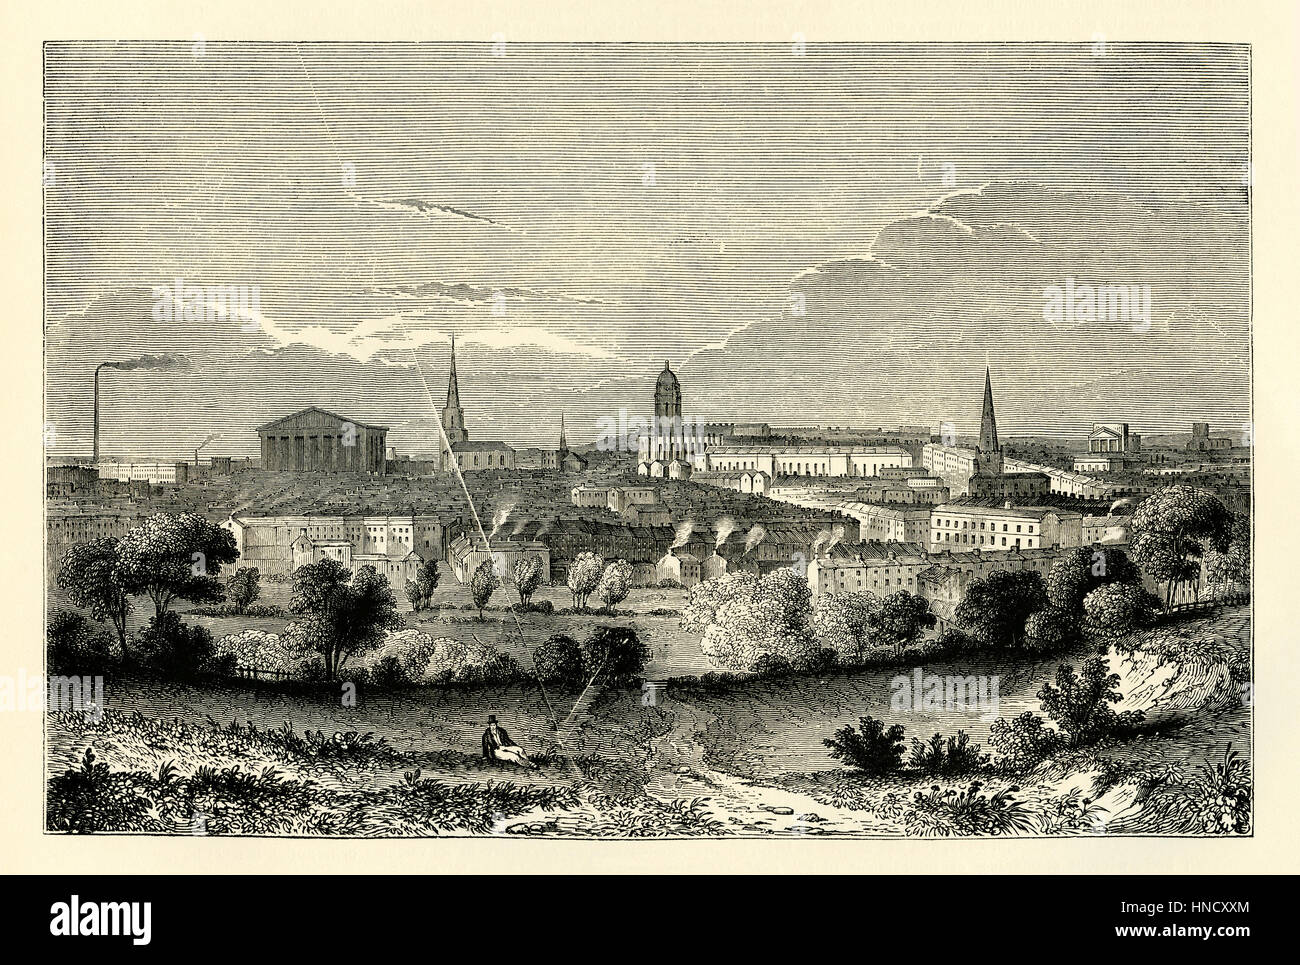 Birmingham, West Midlands, England – an old engraving c. 1840. A market town in the middle ages, Birmingham grew rapidly in the Industrial Revolution Stock Photo